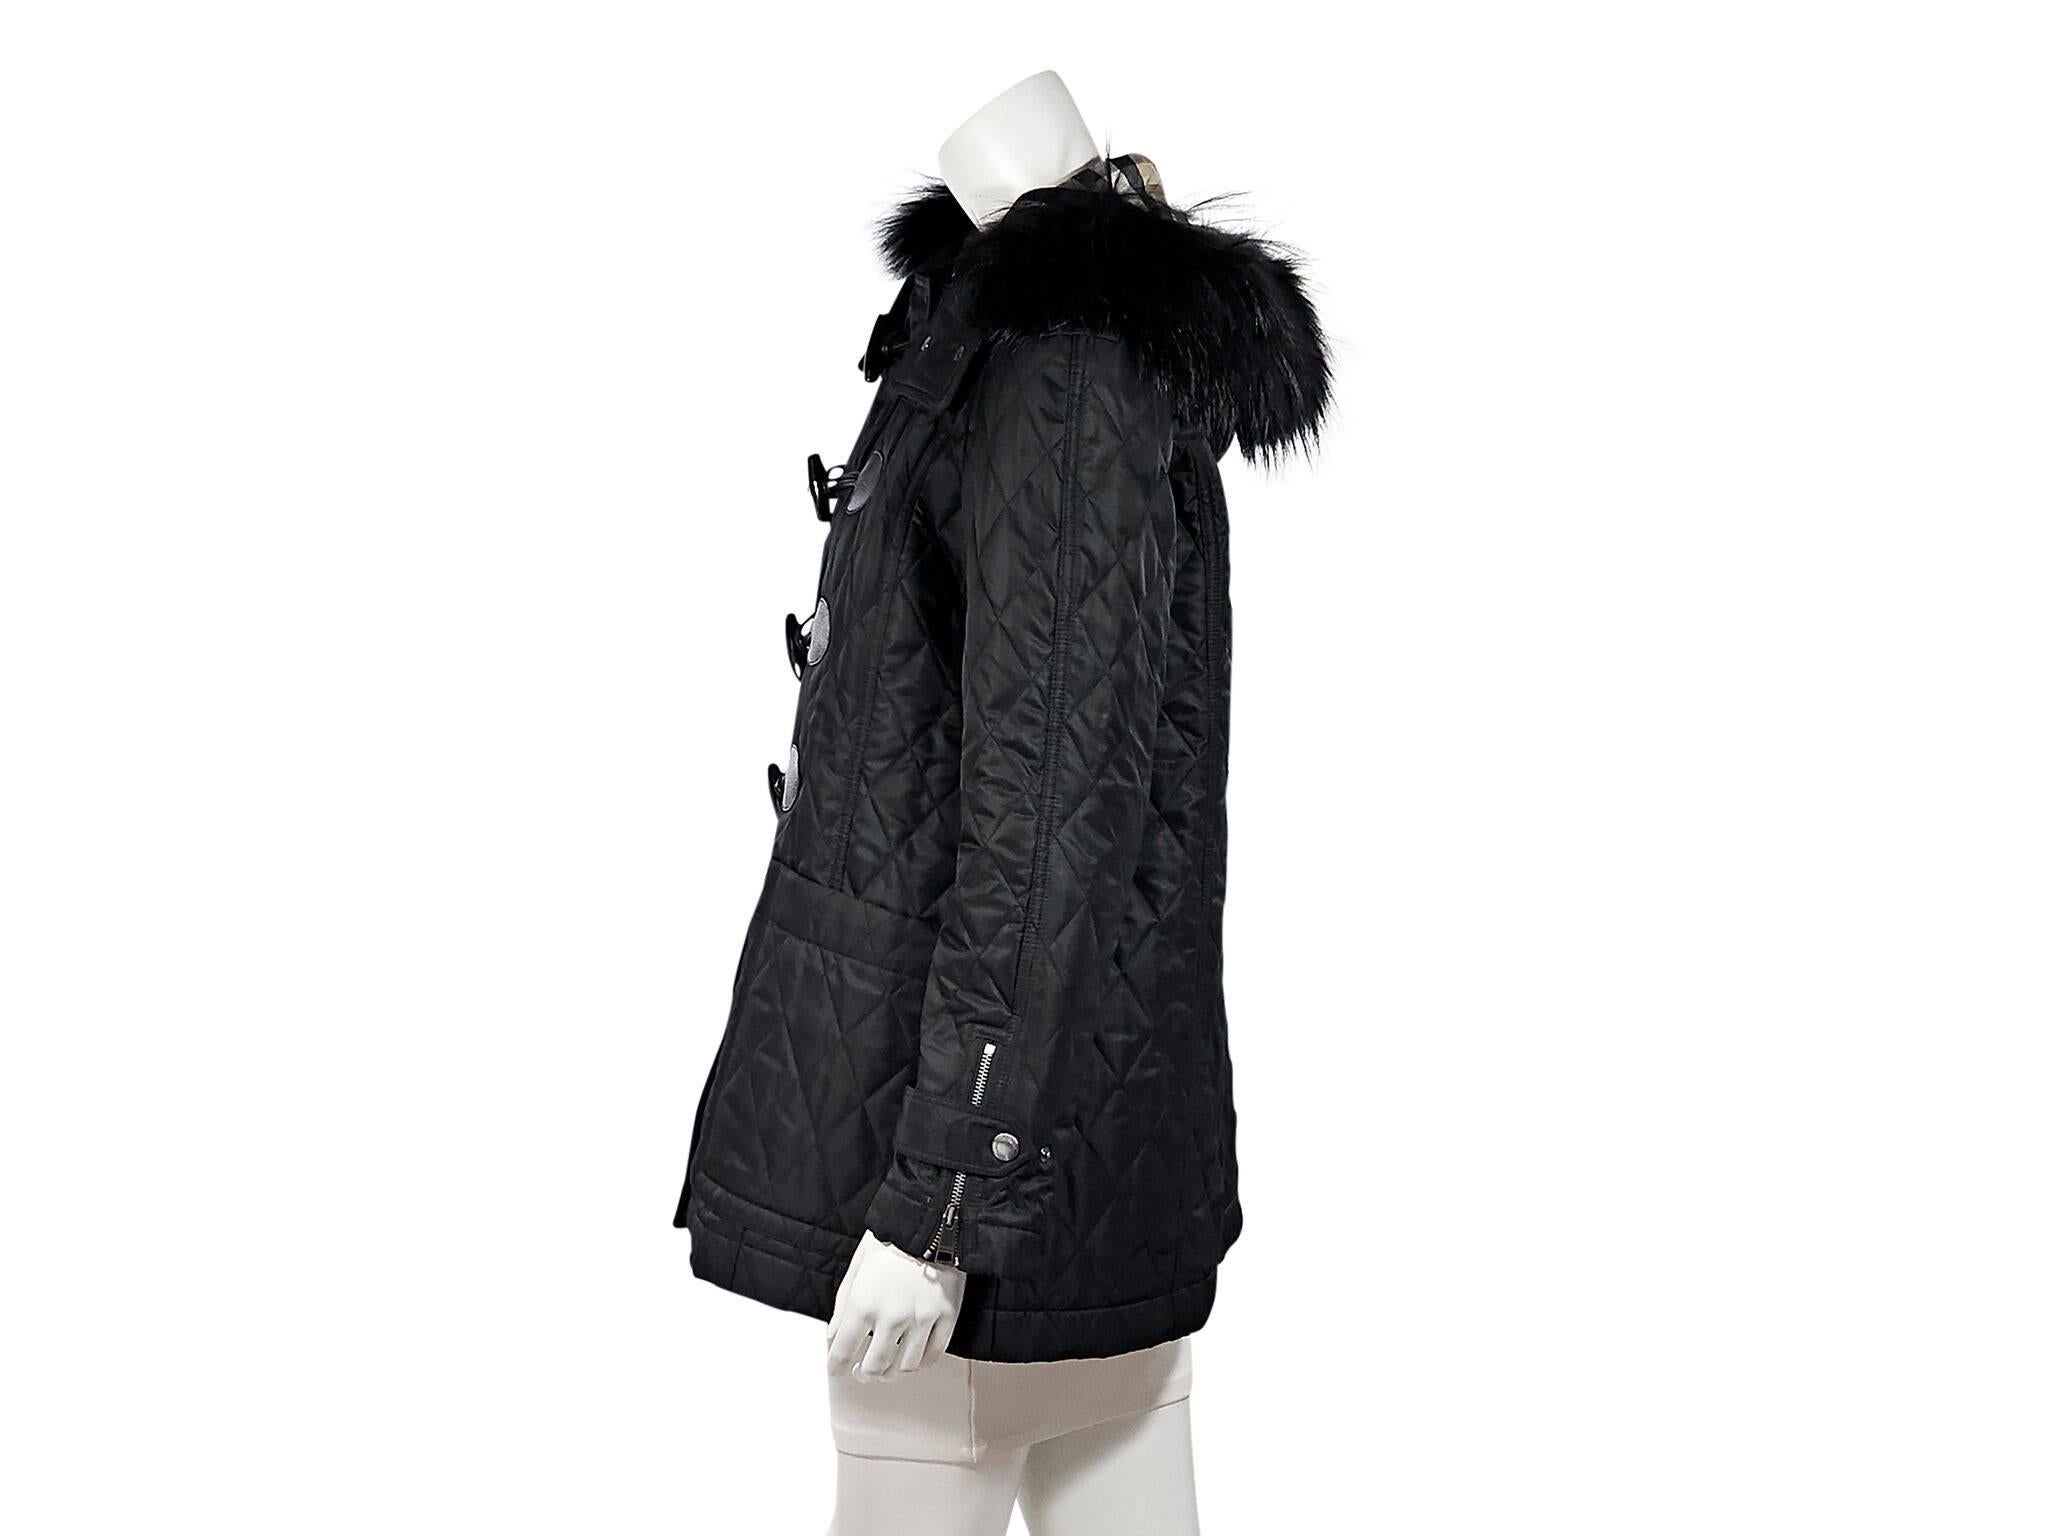 Product details:  Black quilted hooded jacket by Burberry Brit.  Fur-trimmed hood.  Long sleeves.  Snap tab over zip cuffs.  Toggle front closure.  Waist slide pockets.  40